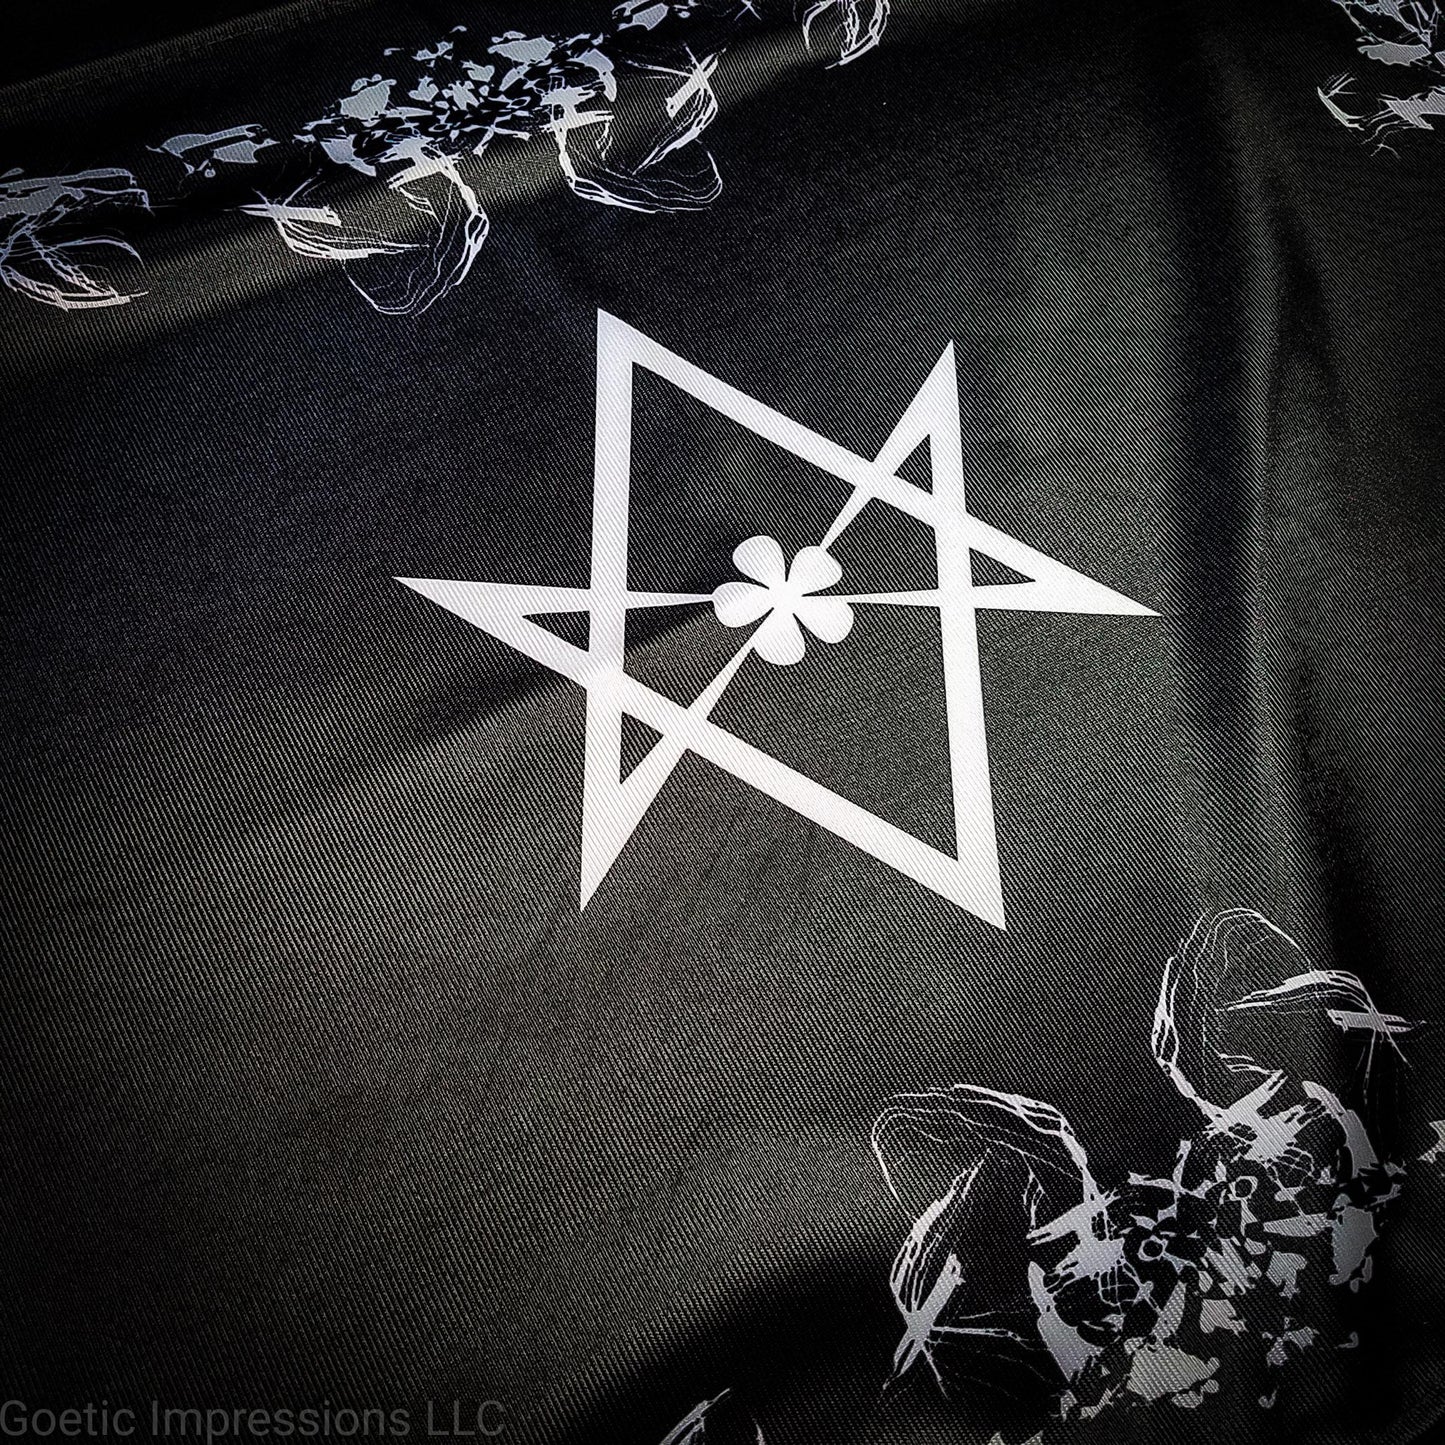 A black and white altar cloth with the Aleister Crowley Unicursal Hexagram from Thelema.